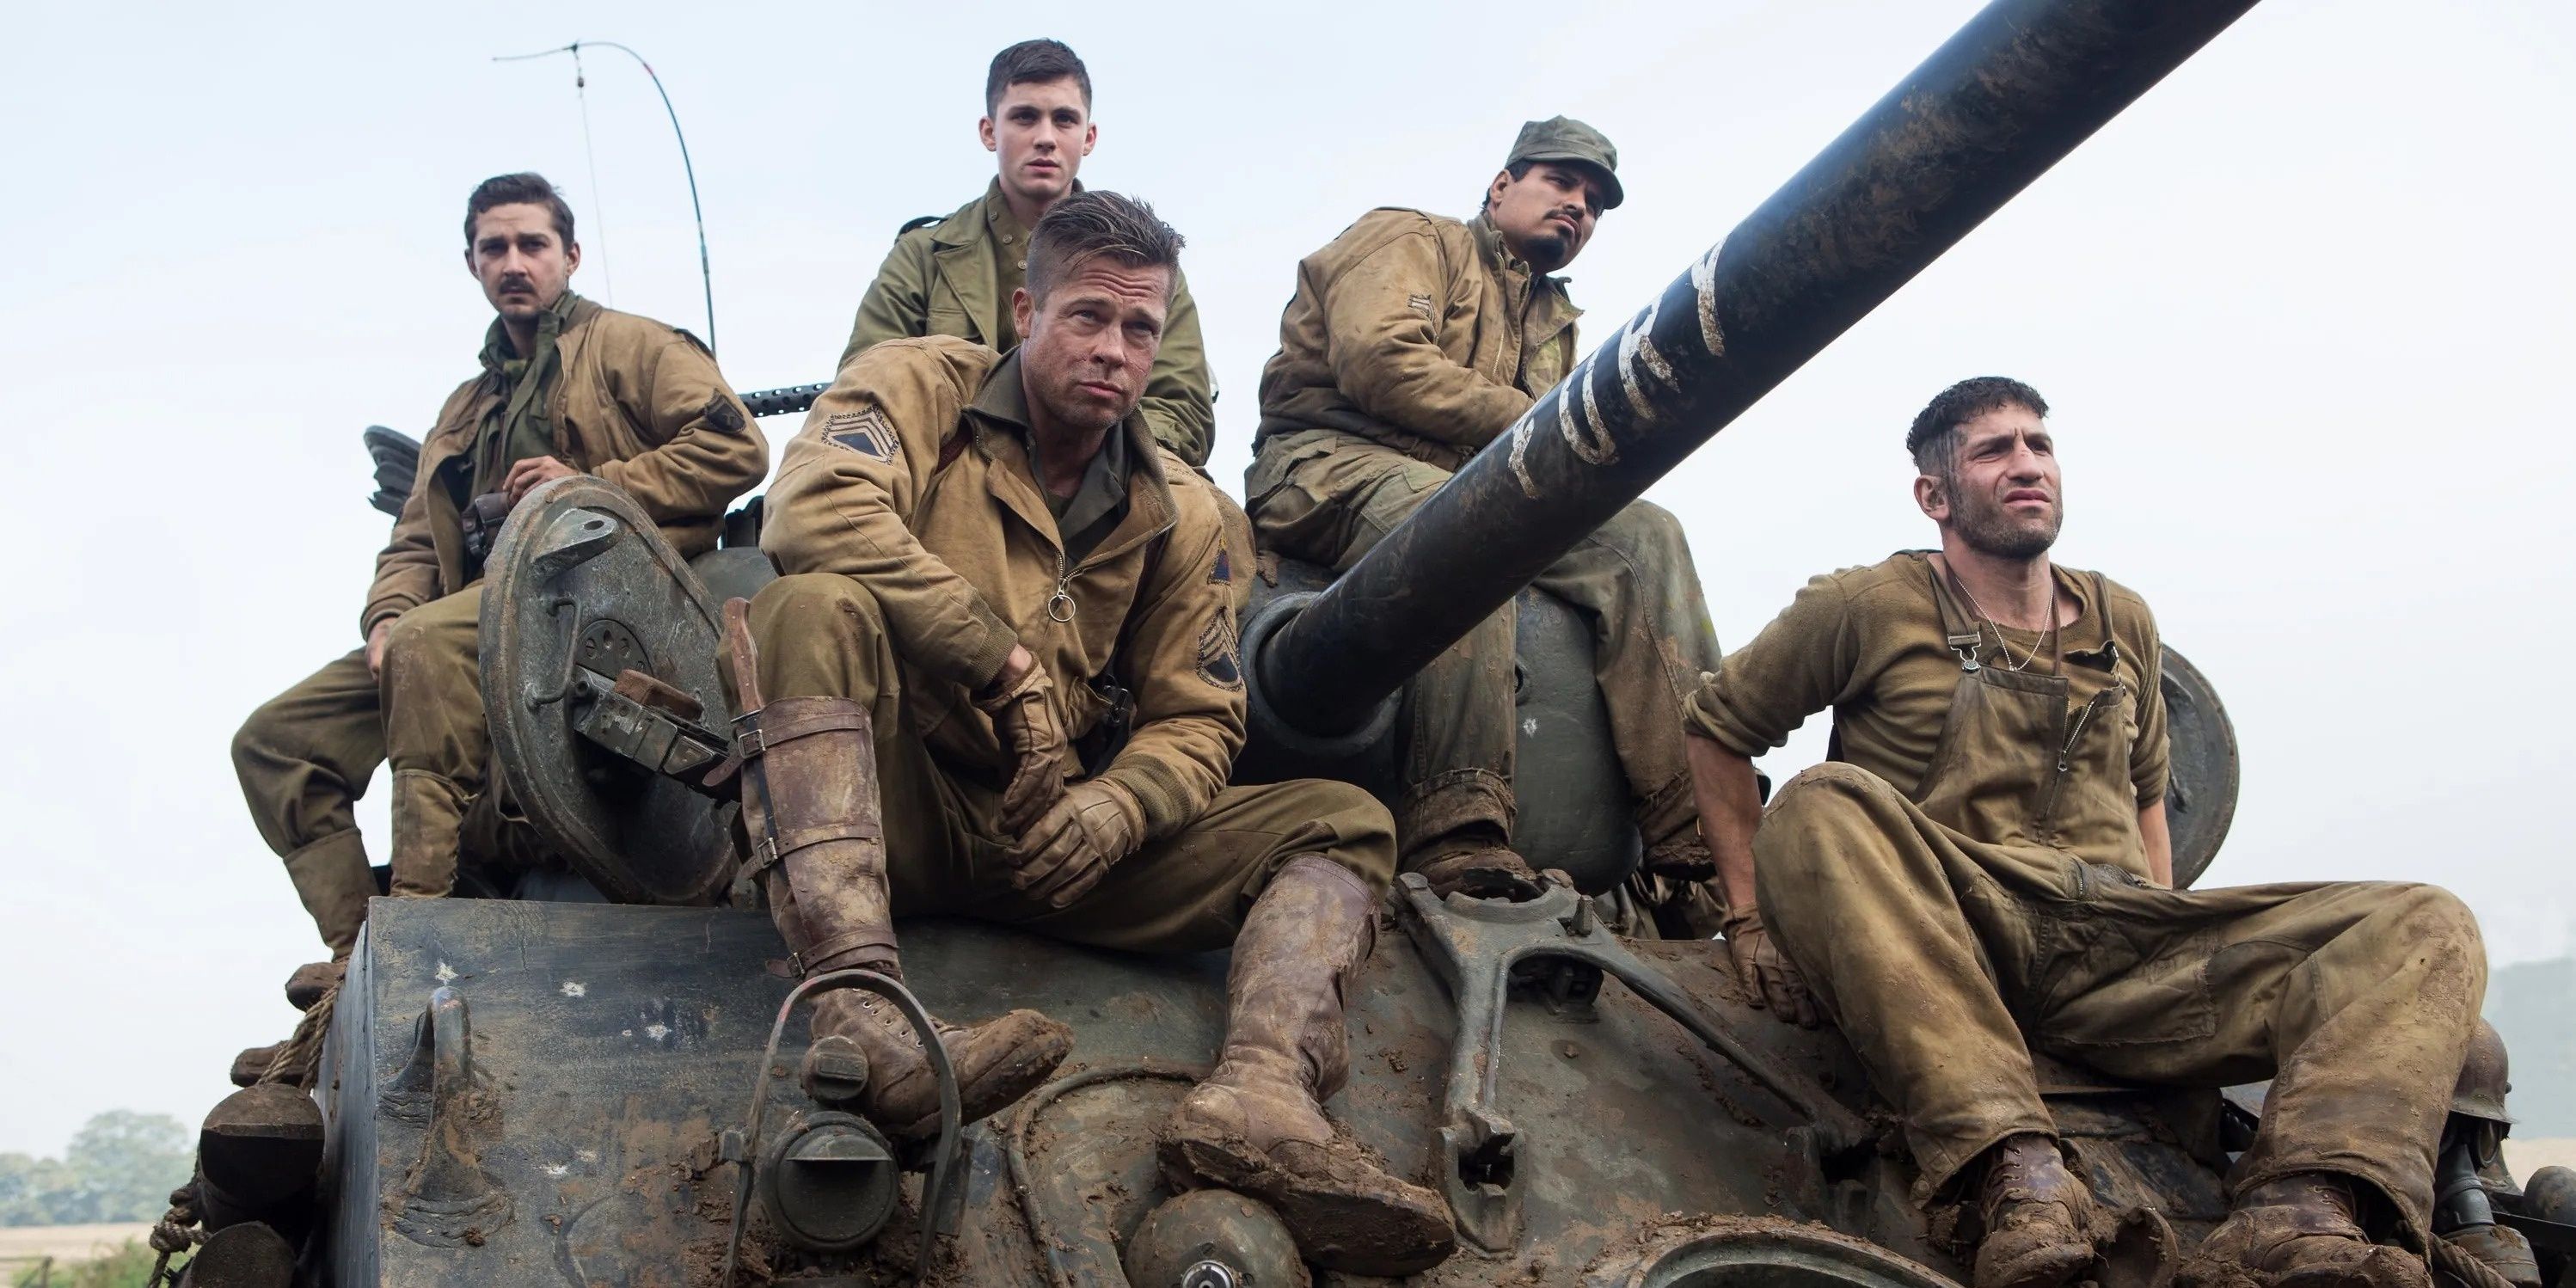 Brad Pitt and fellow soldiers sitting on top of tank in Fury